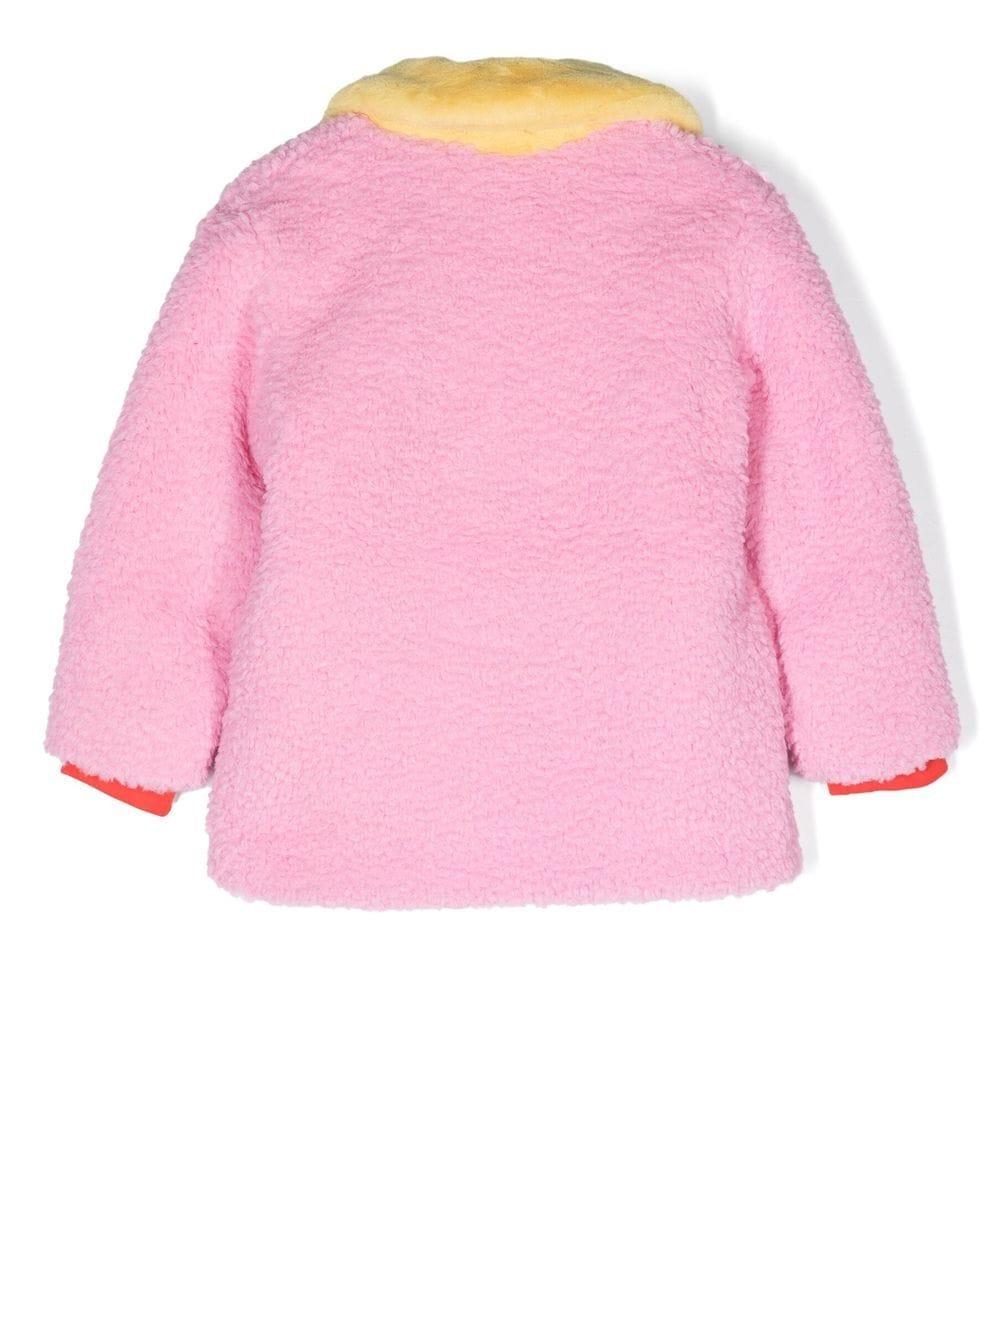 Shop The Marc Jacobs Pink Coat With Yellow Neck In Rosa